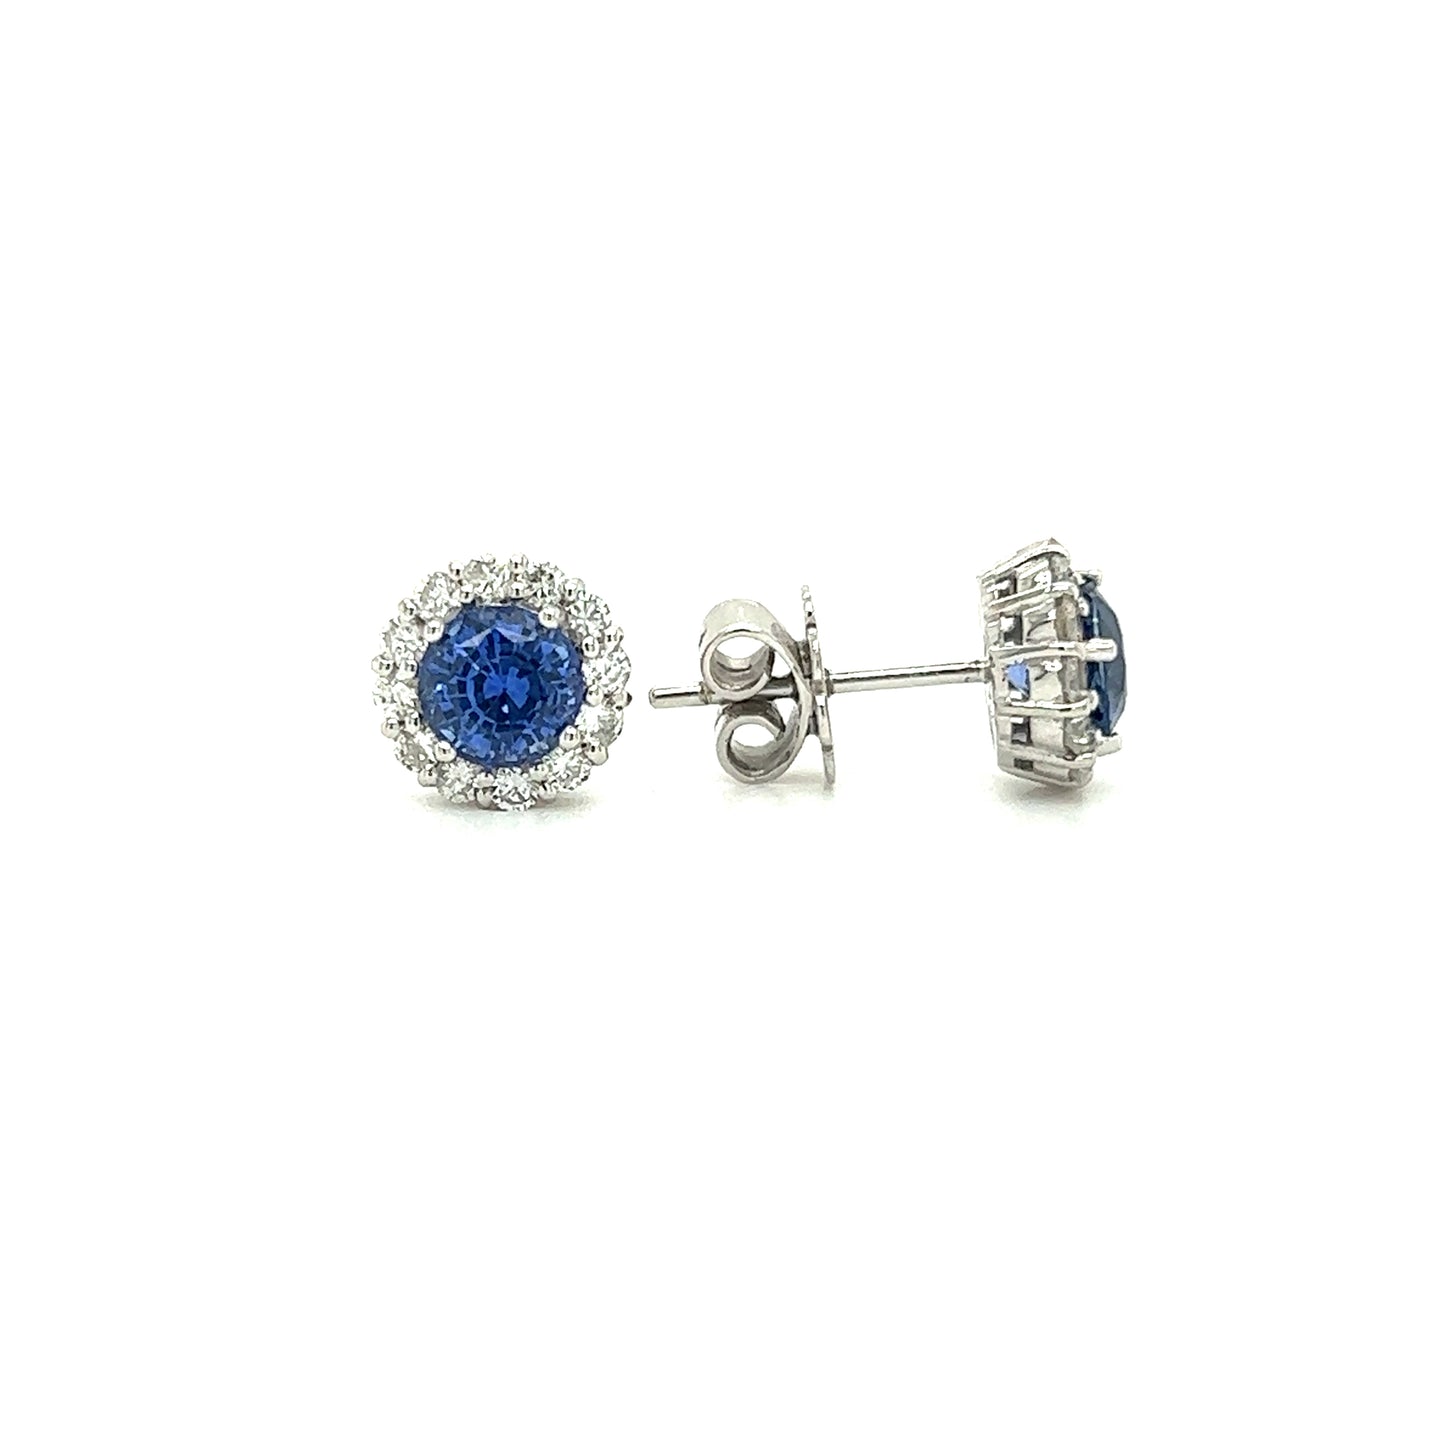 Blue Sapphire Stud Earrings with 0.53ctw of Diamond in 14K White Gold Front and Side View